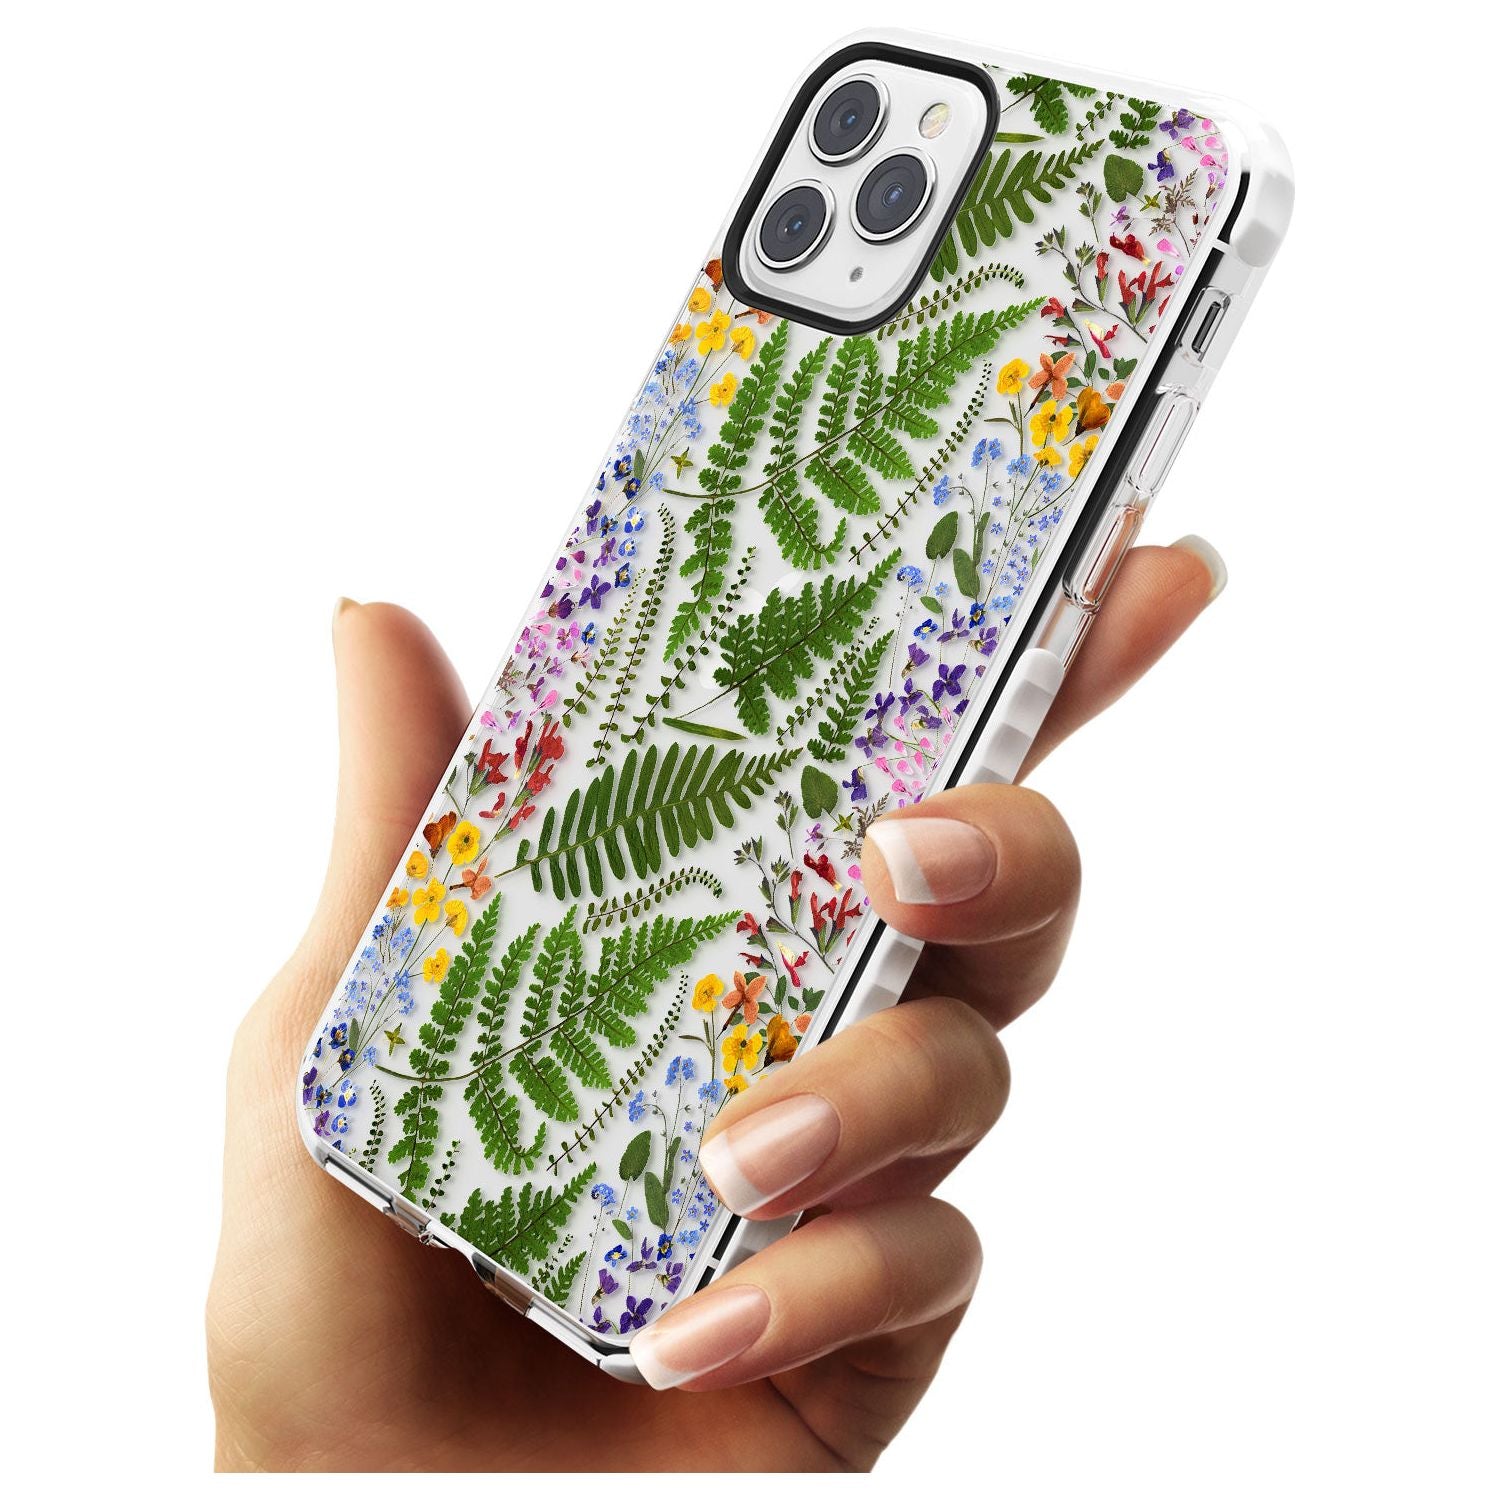 Busy Floral and Fern Design Impact Phone Case for iPhone 11 Pro Max